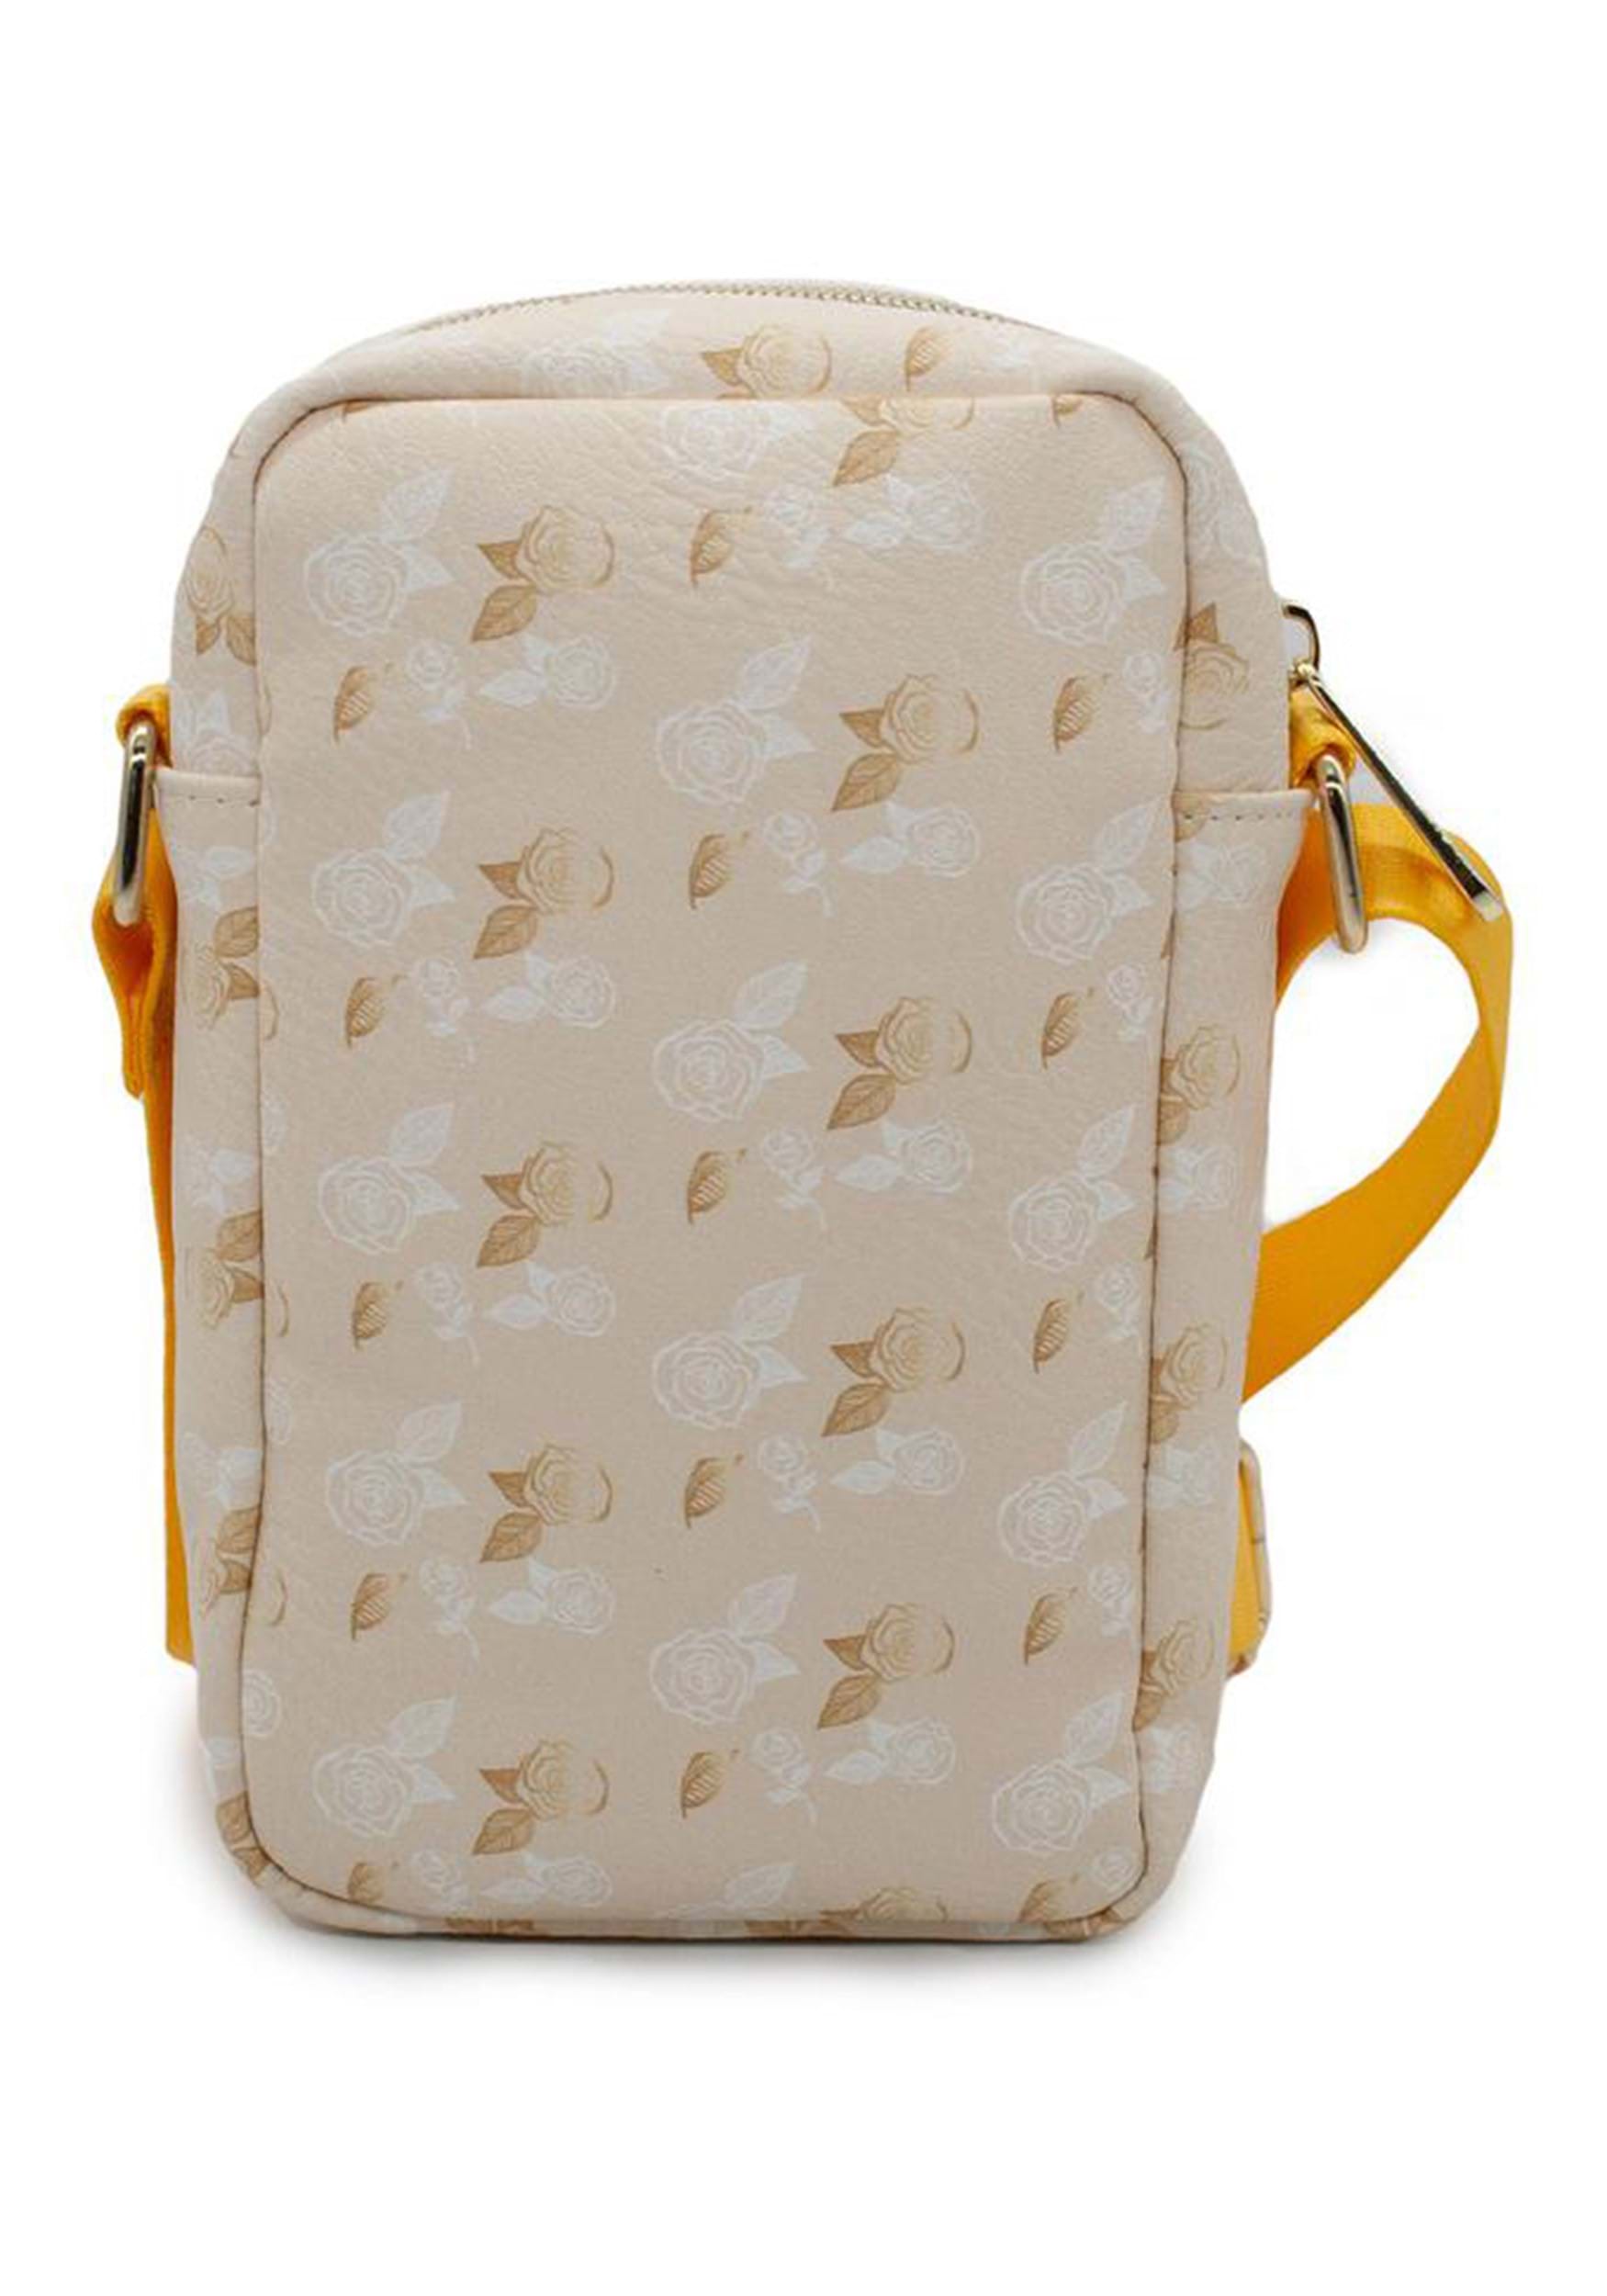 Petunia Pickle Bottom Introduces Three Beauty and the Beast Patterns for  Diaper Bags and Accessories